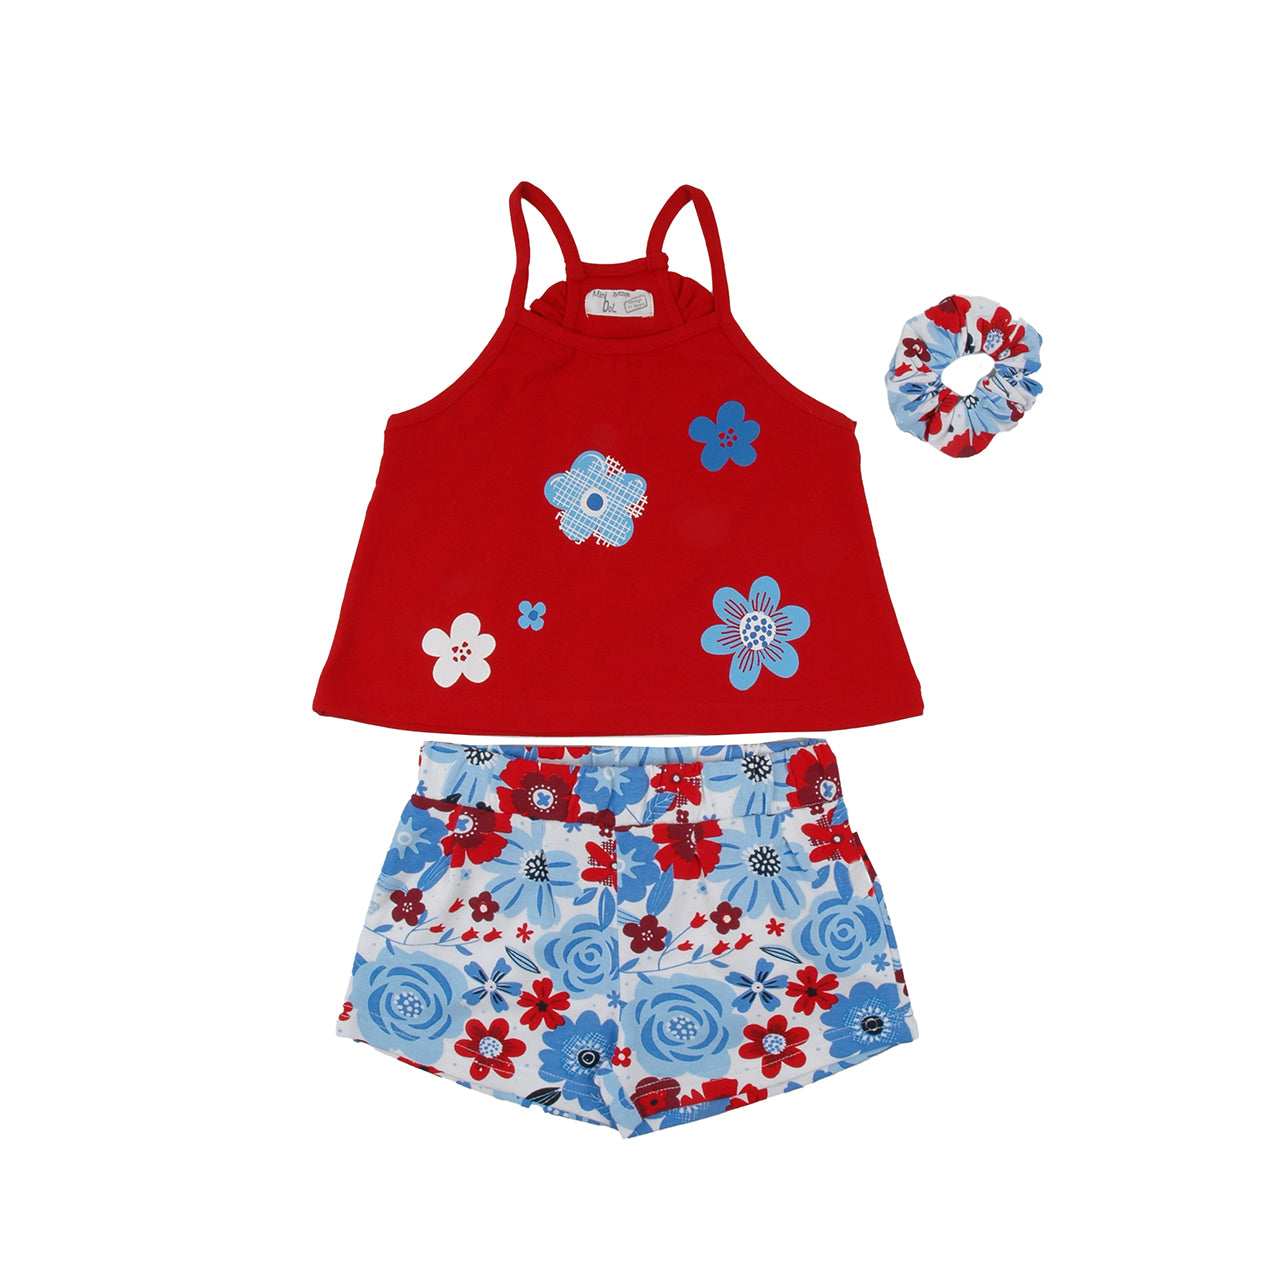 Girls floral shorts and vest for Summer - Adora Childrenswear